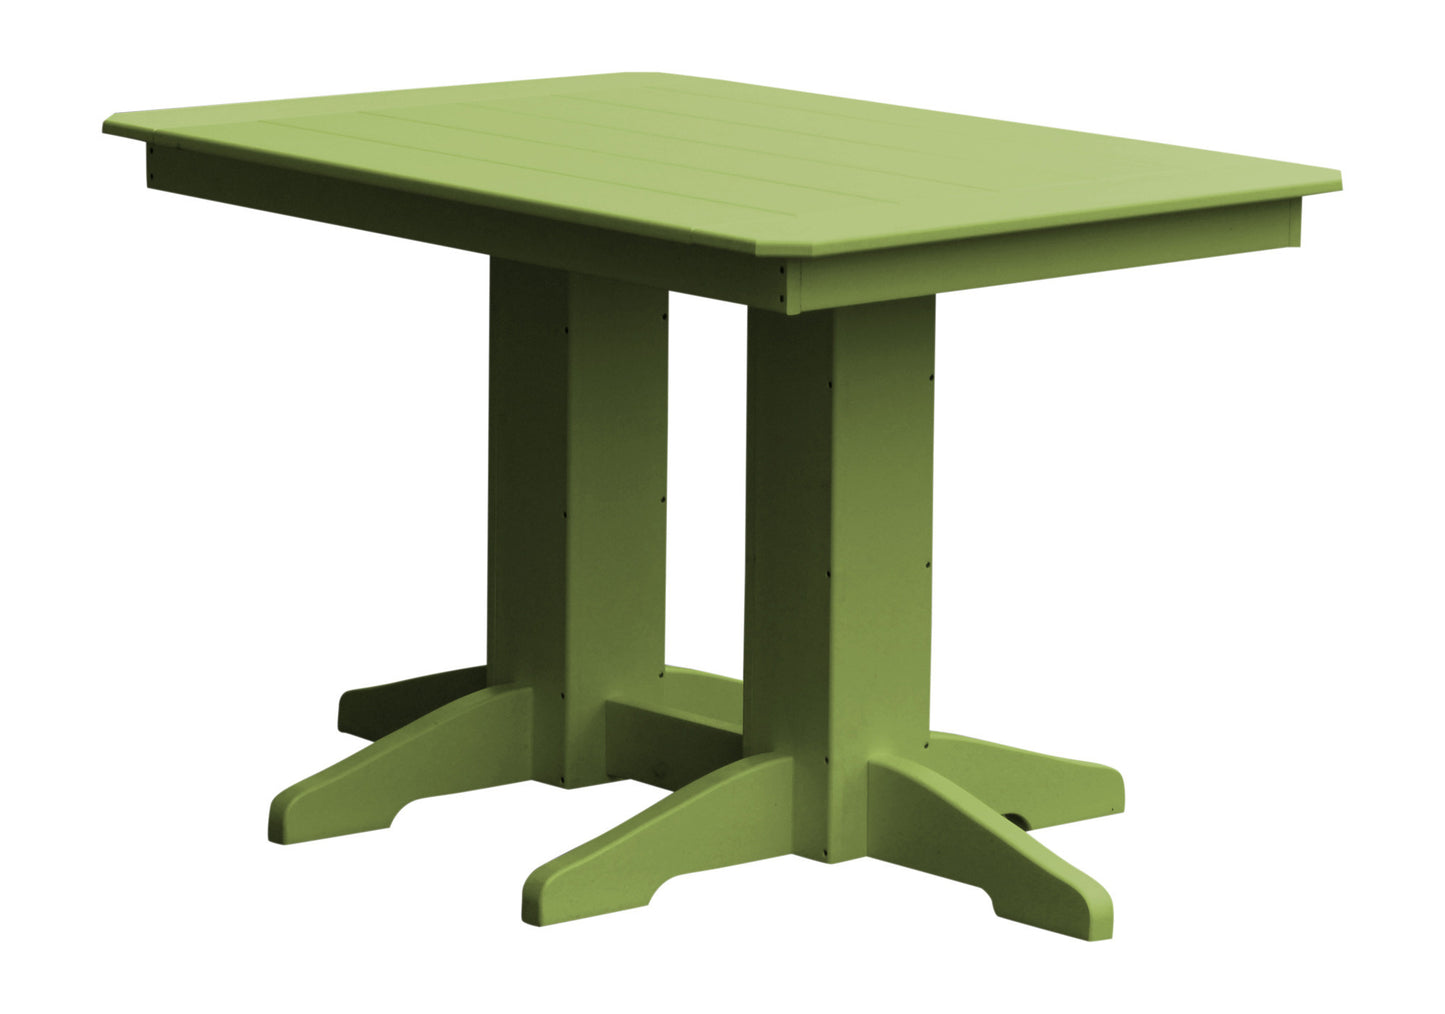 A&L Furniture Company Recycled Plastic 4' Dining Table - Tropical lime